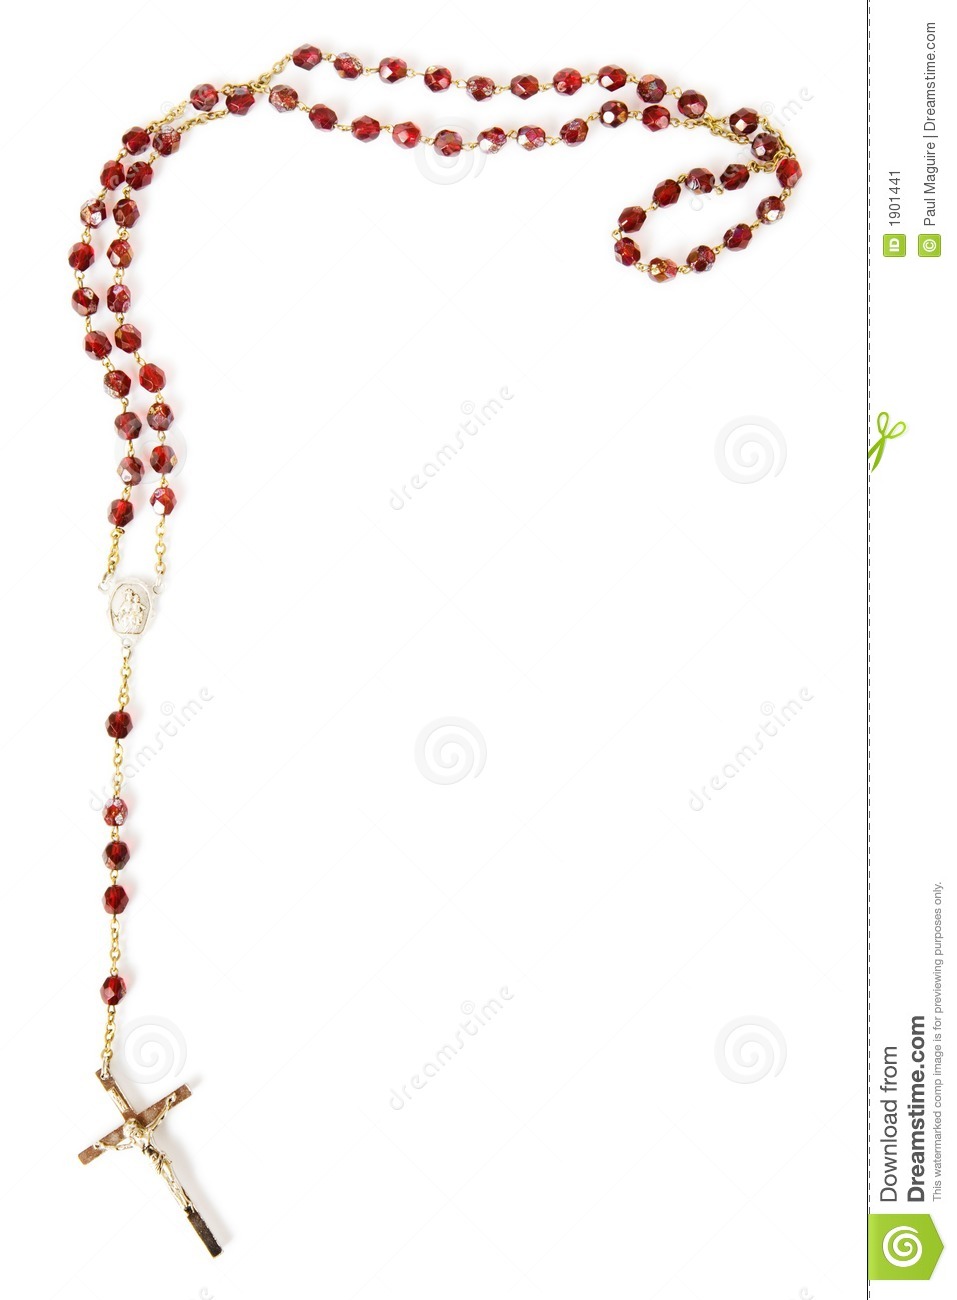 More Similar Stock Images Of   Rosary Beads Isolated On White